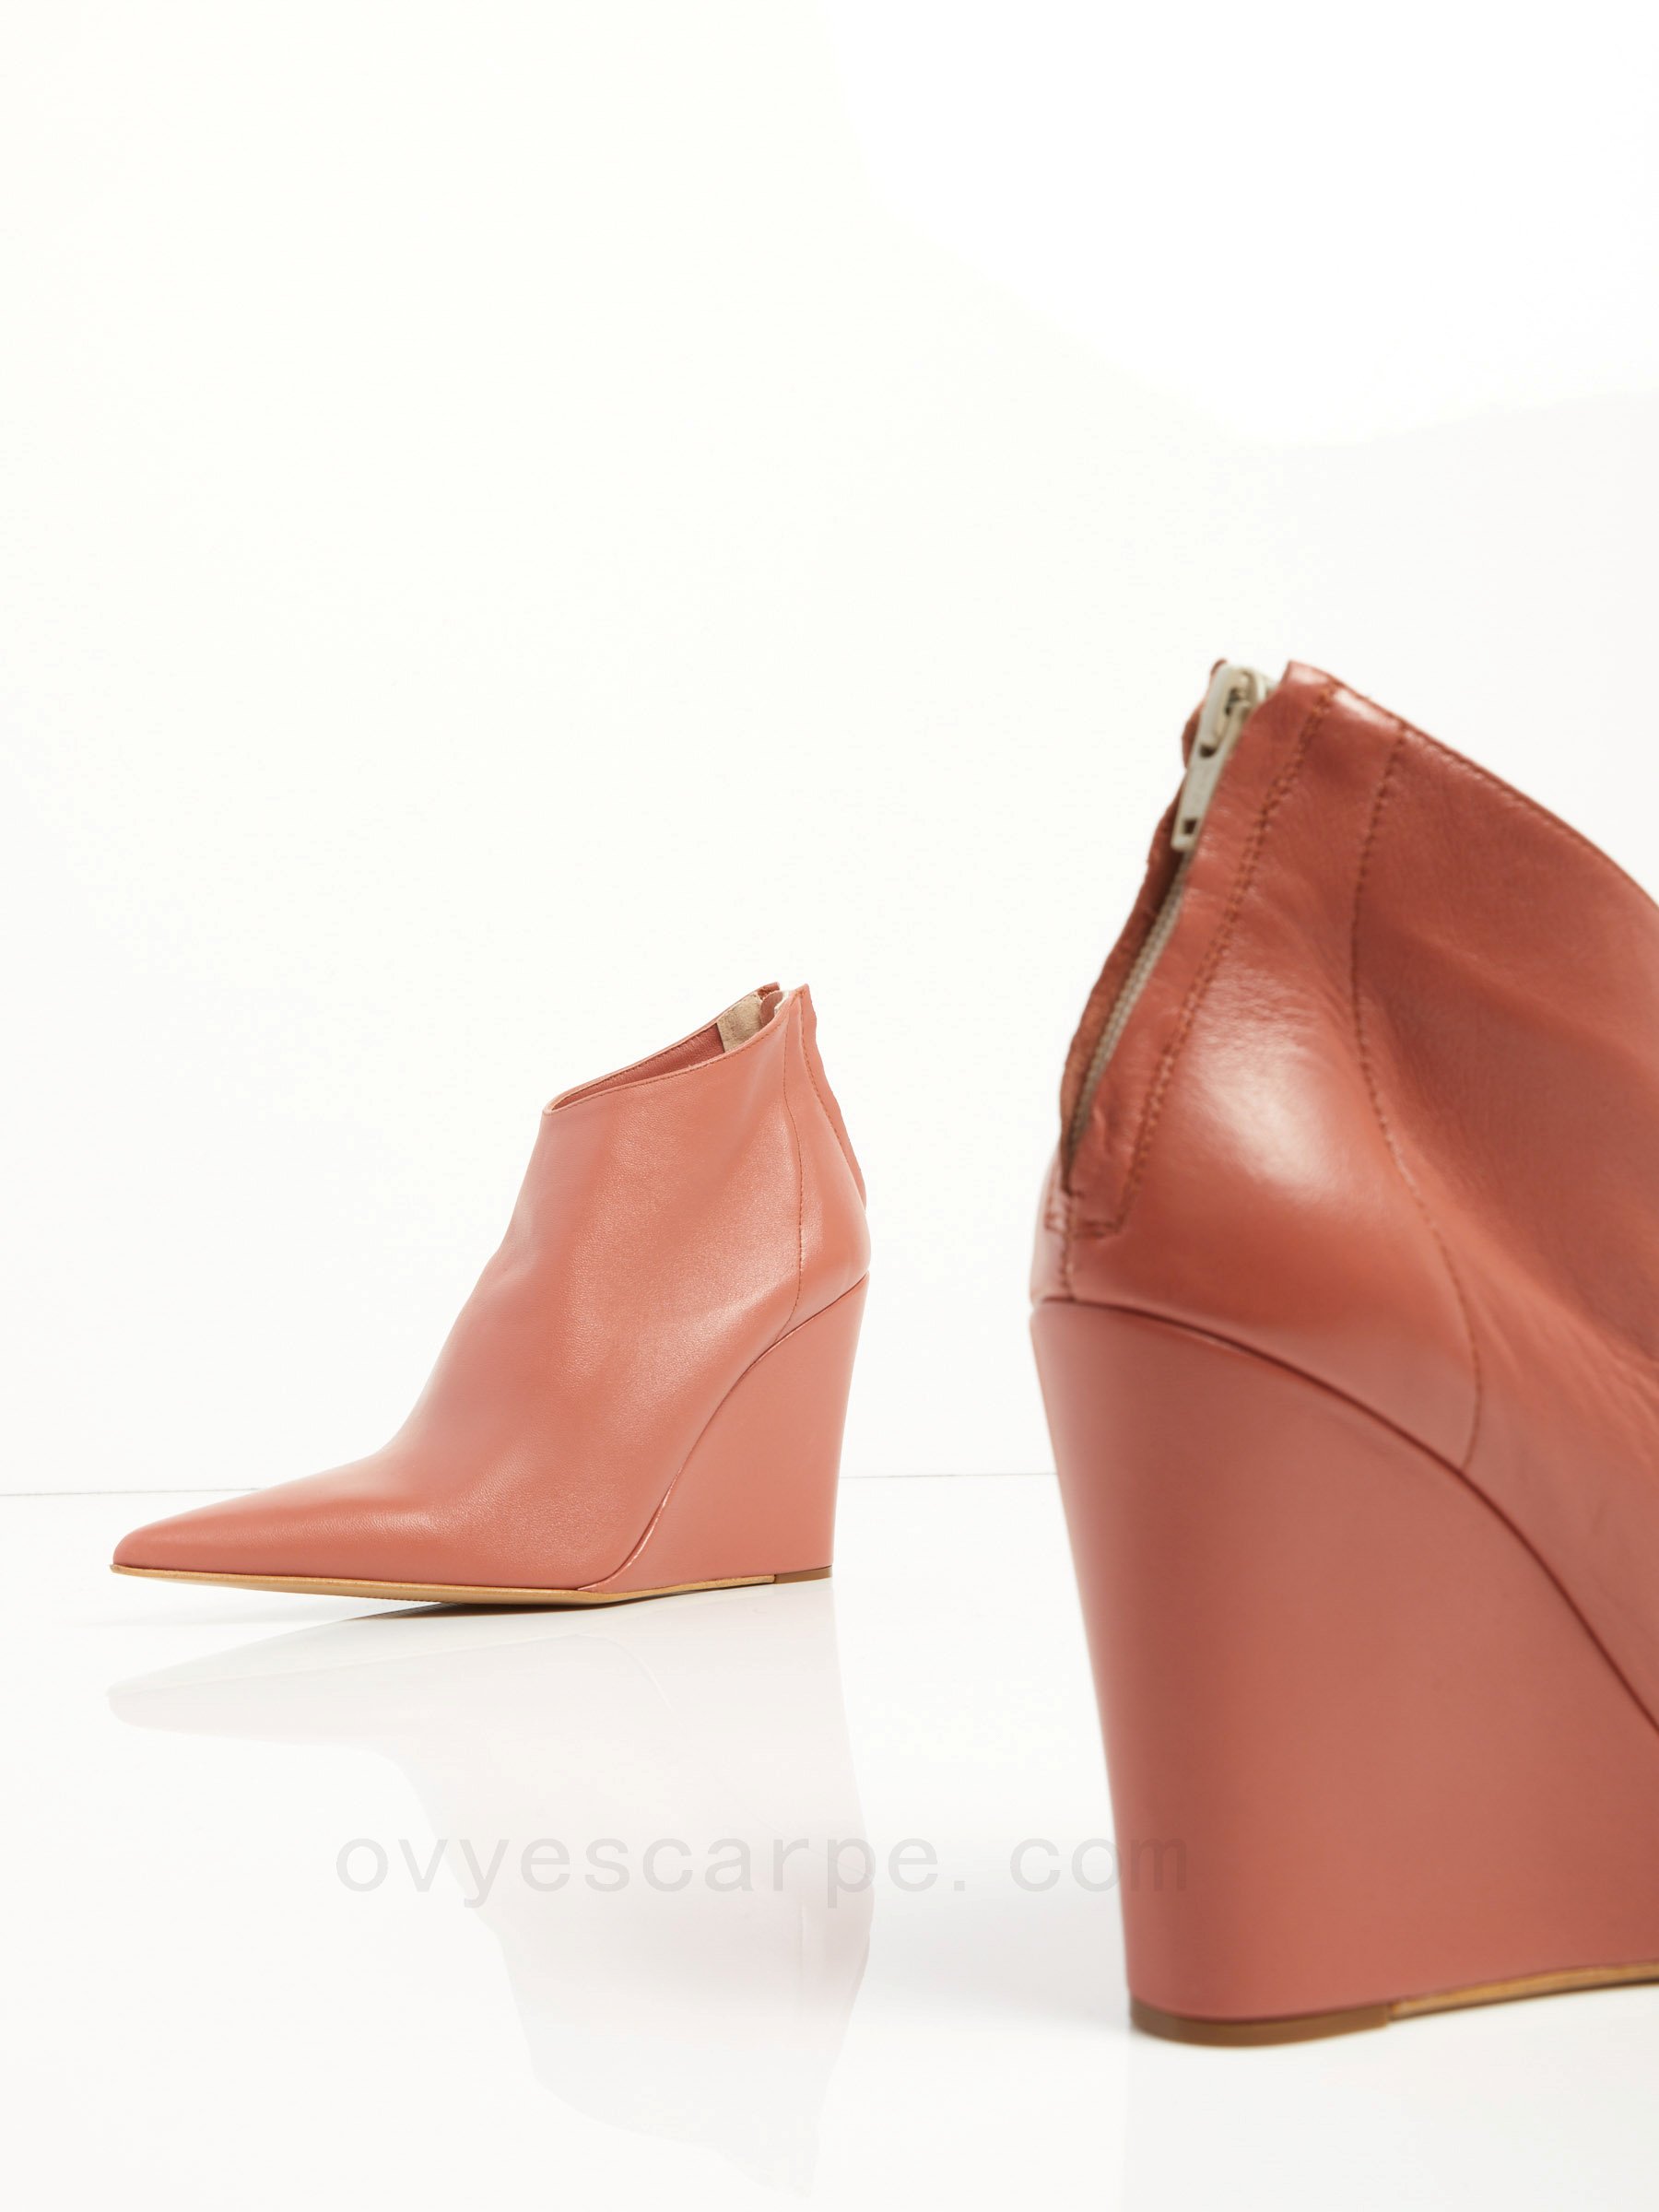 Wedge Leather Ankle Boots F08161027-0470 Fino Al -80%